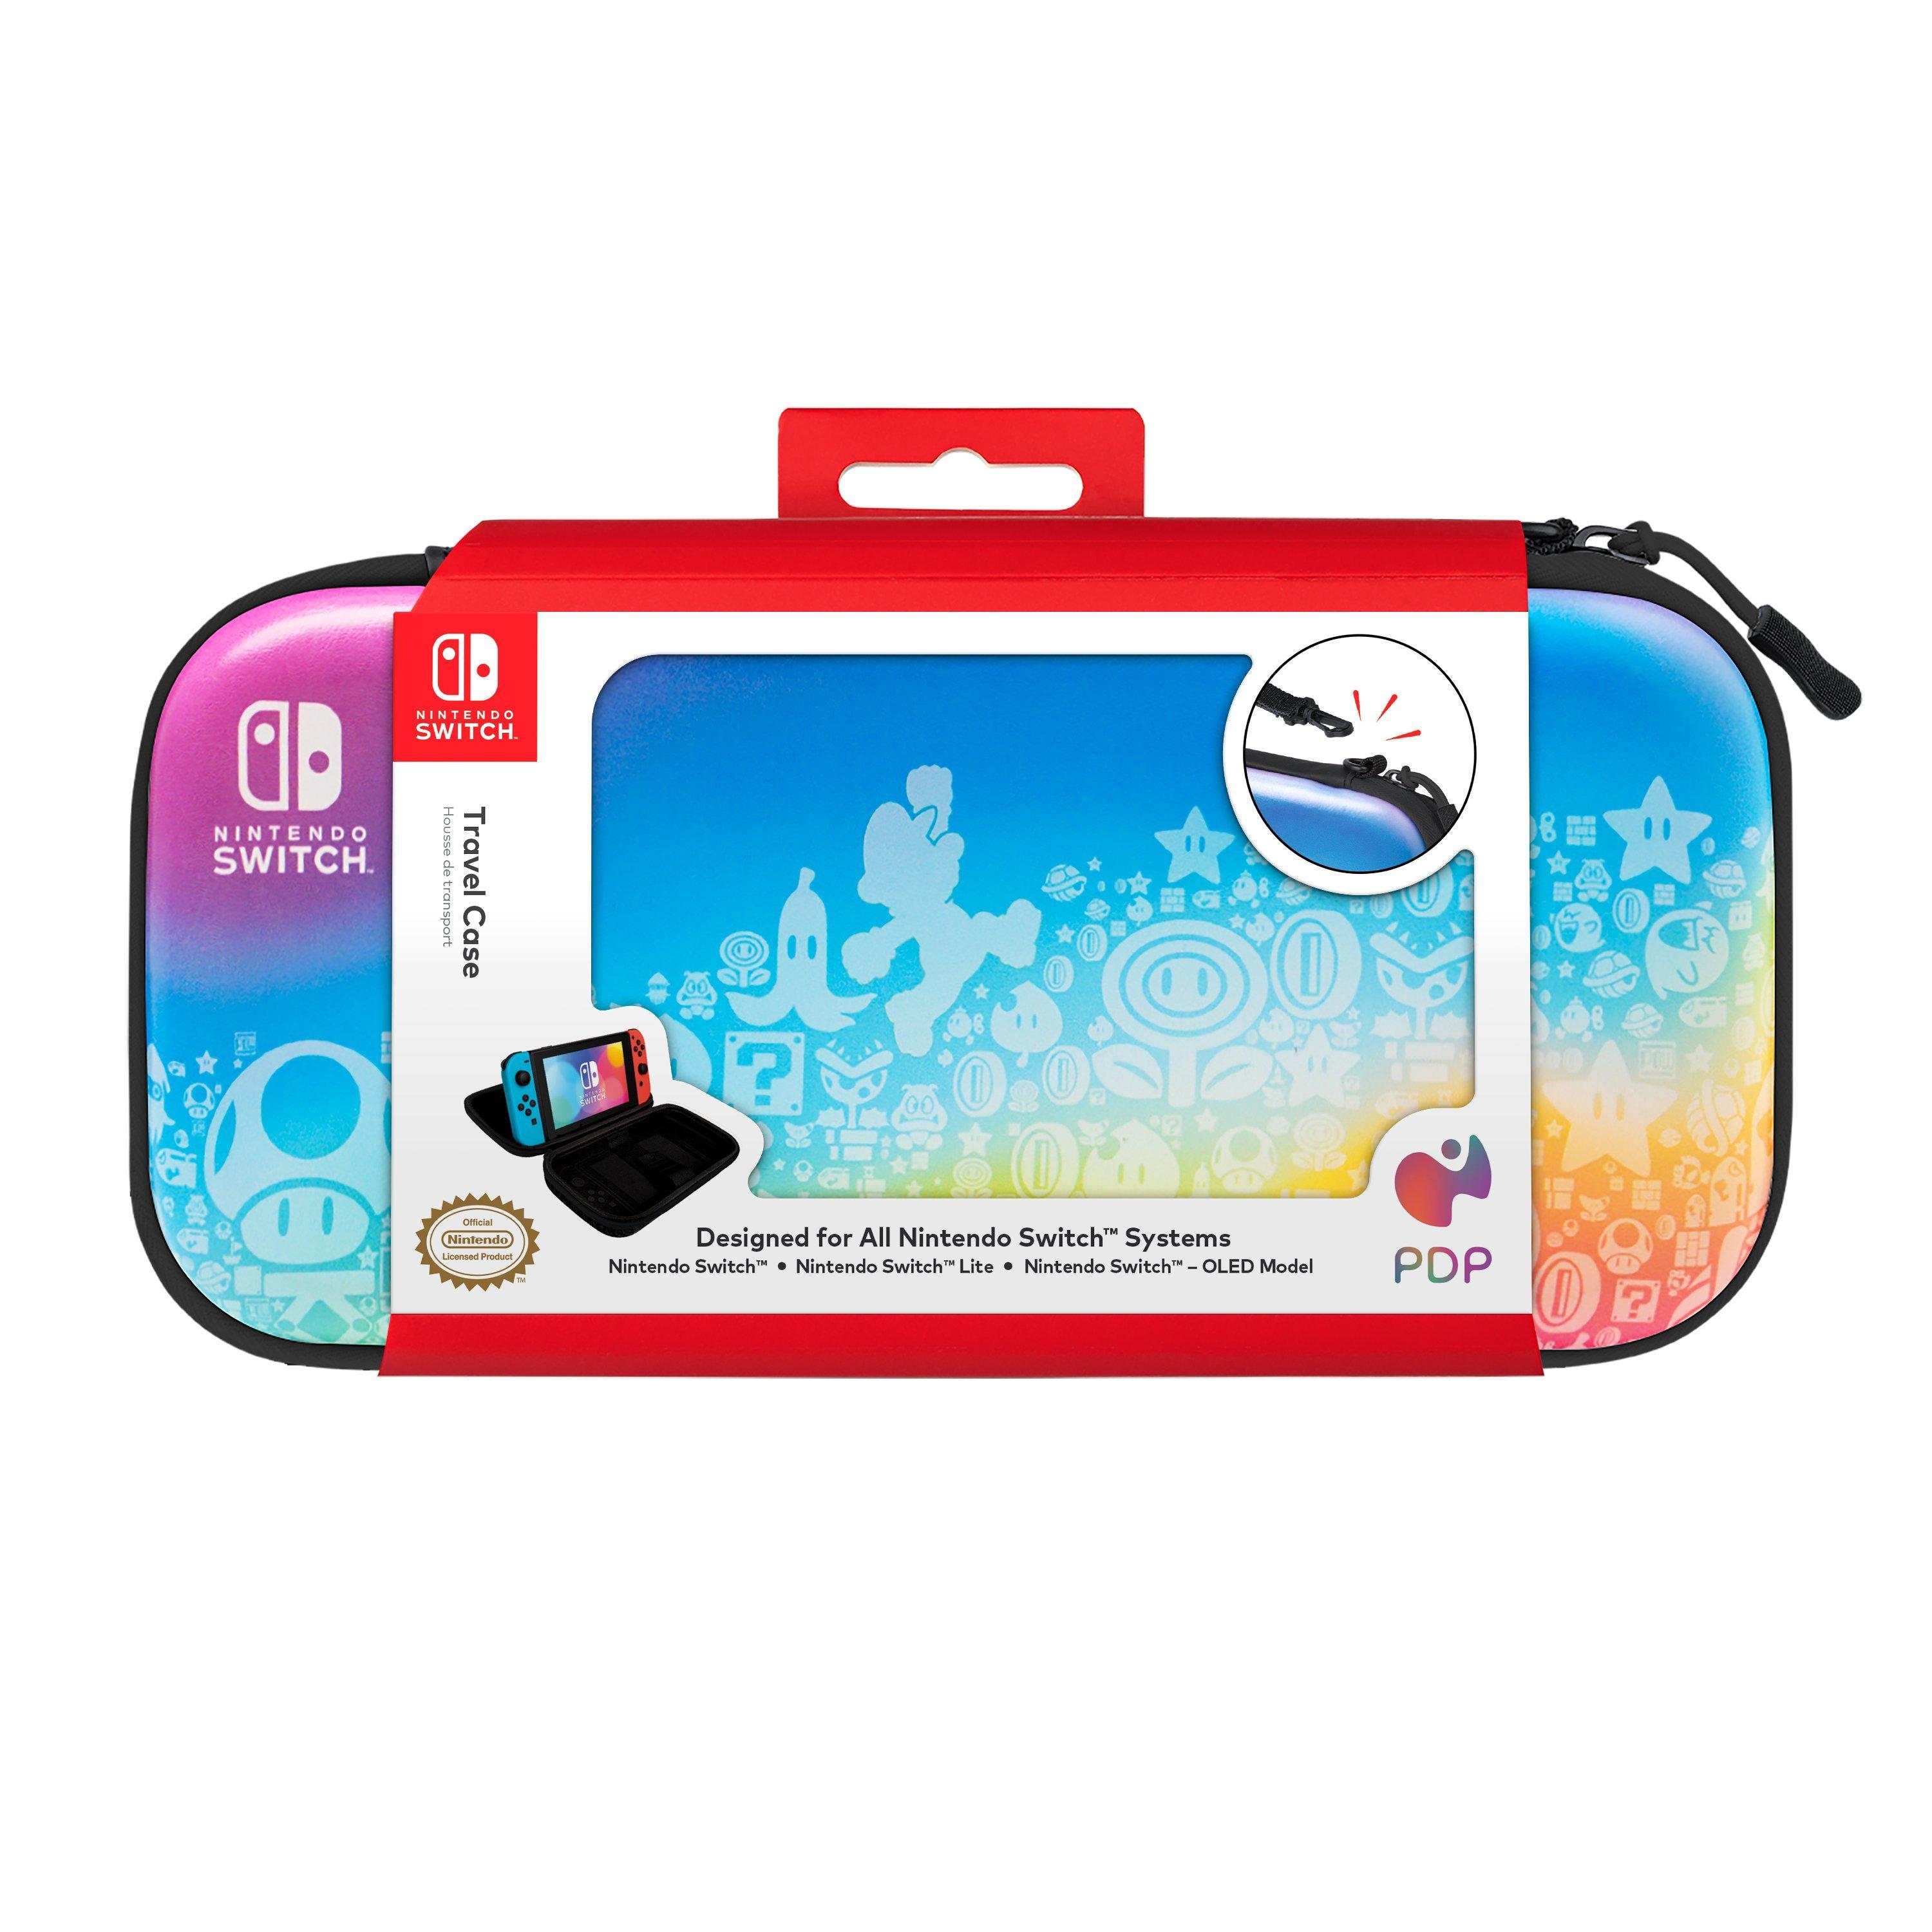 PDP Slim Deluxe Travel Case for Nintendo Switch - Royal Princess Peach